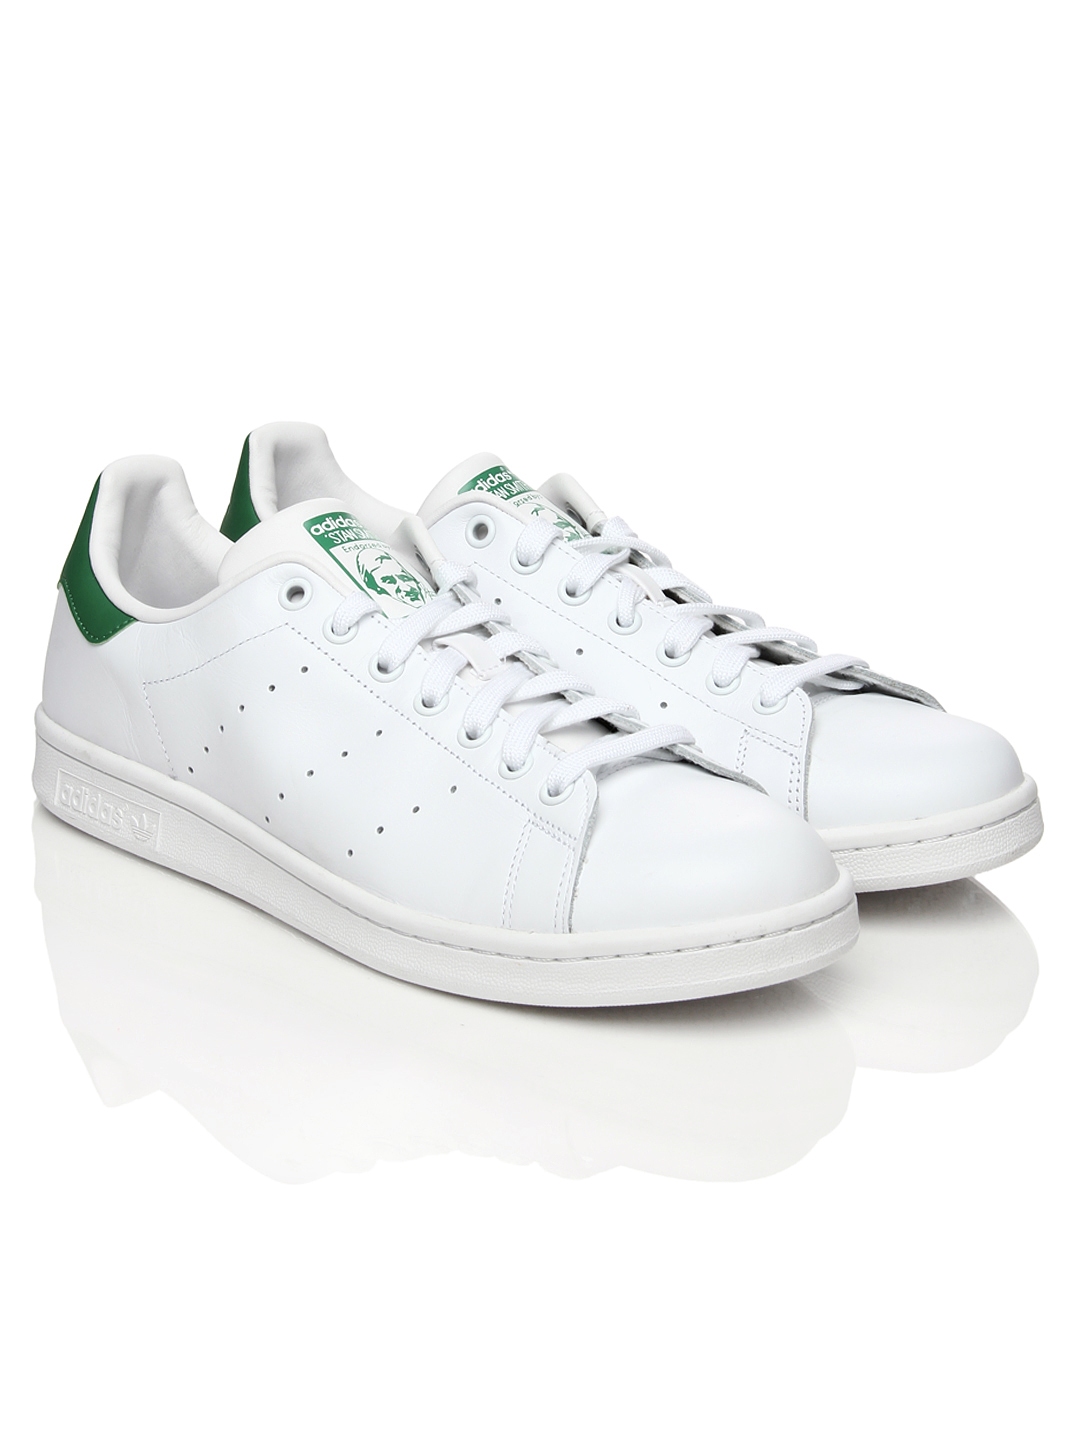 Buy ADIDAS Originals Men White & Green Smith Casual Shoes - Casual Shoes for 370466 Myntra